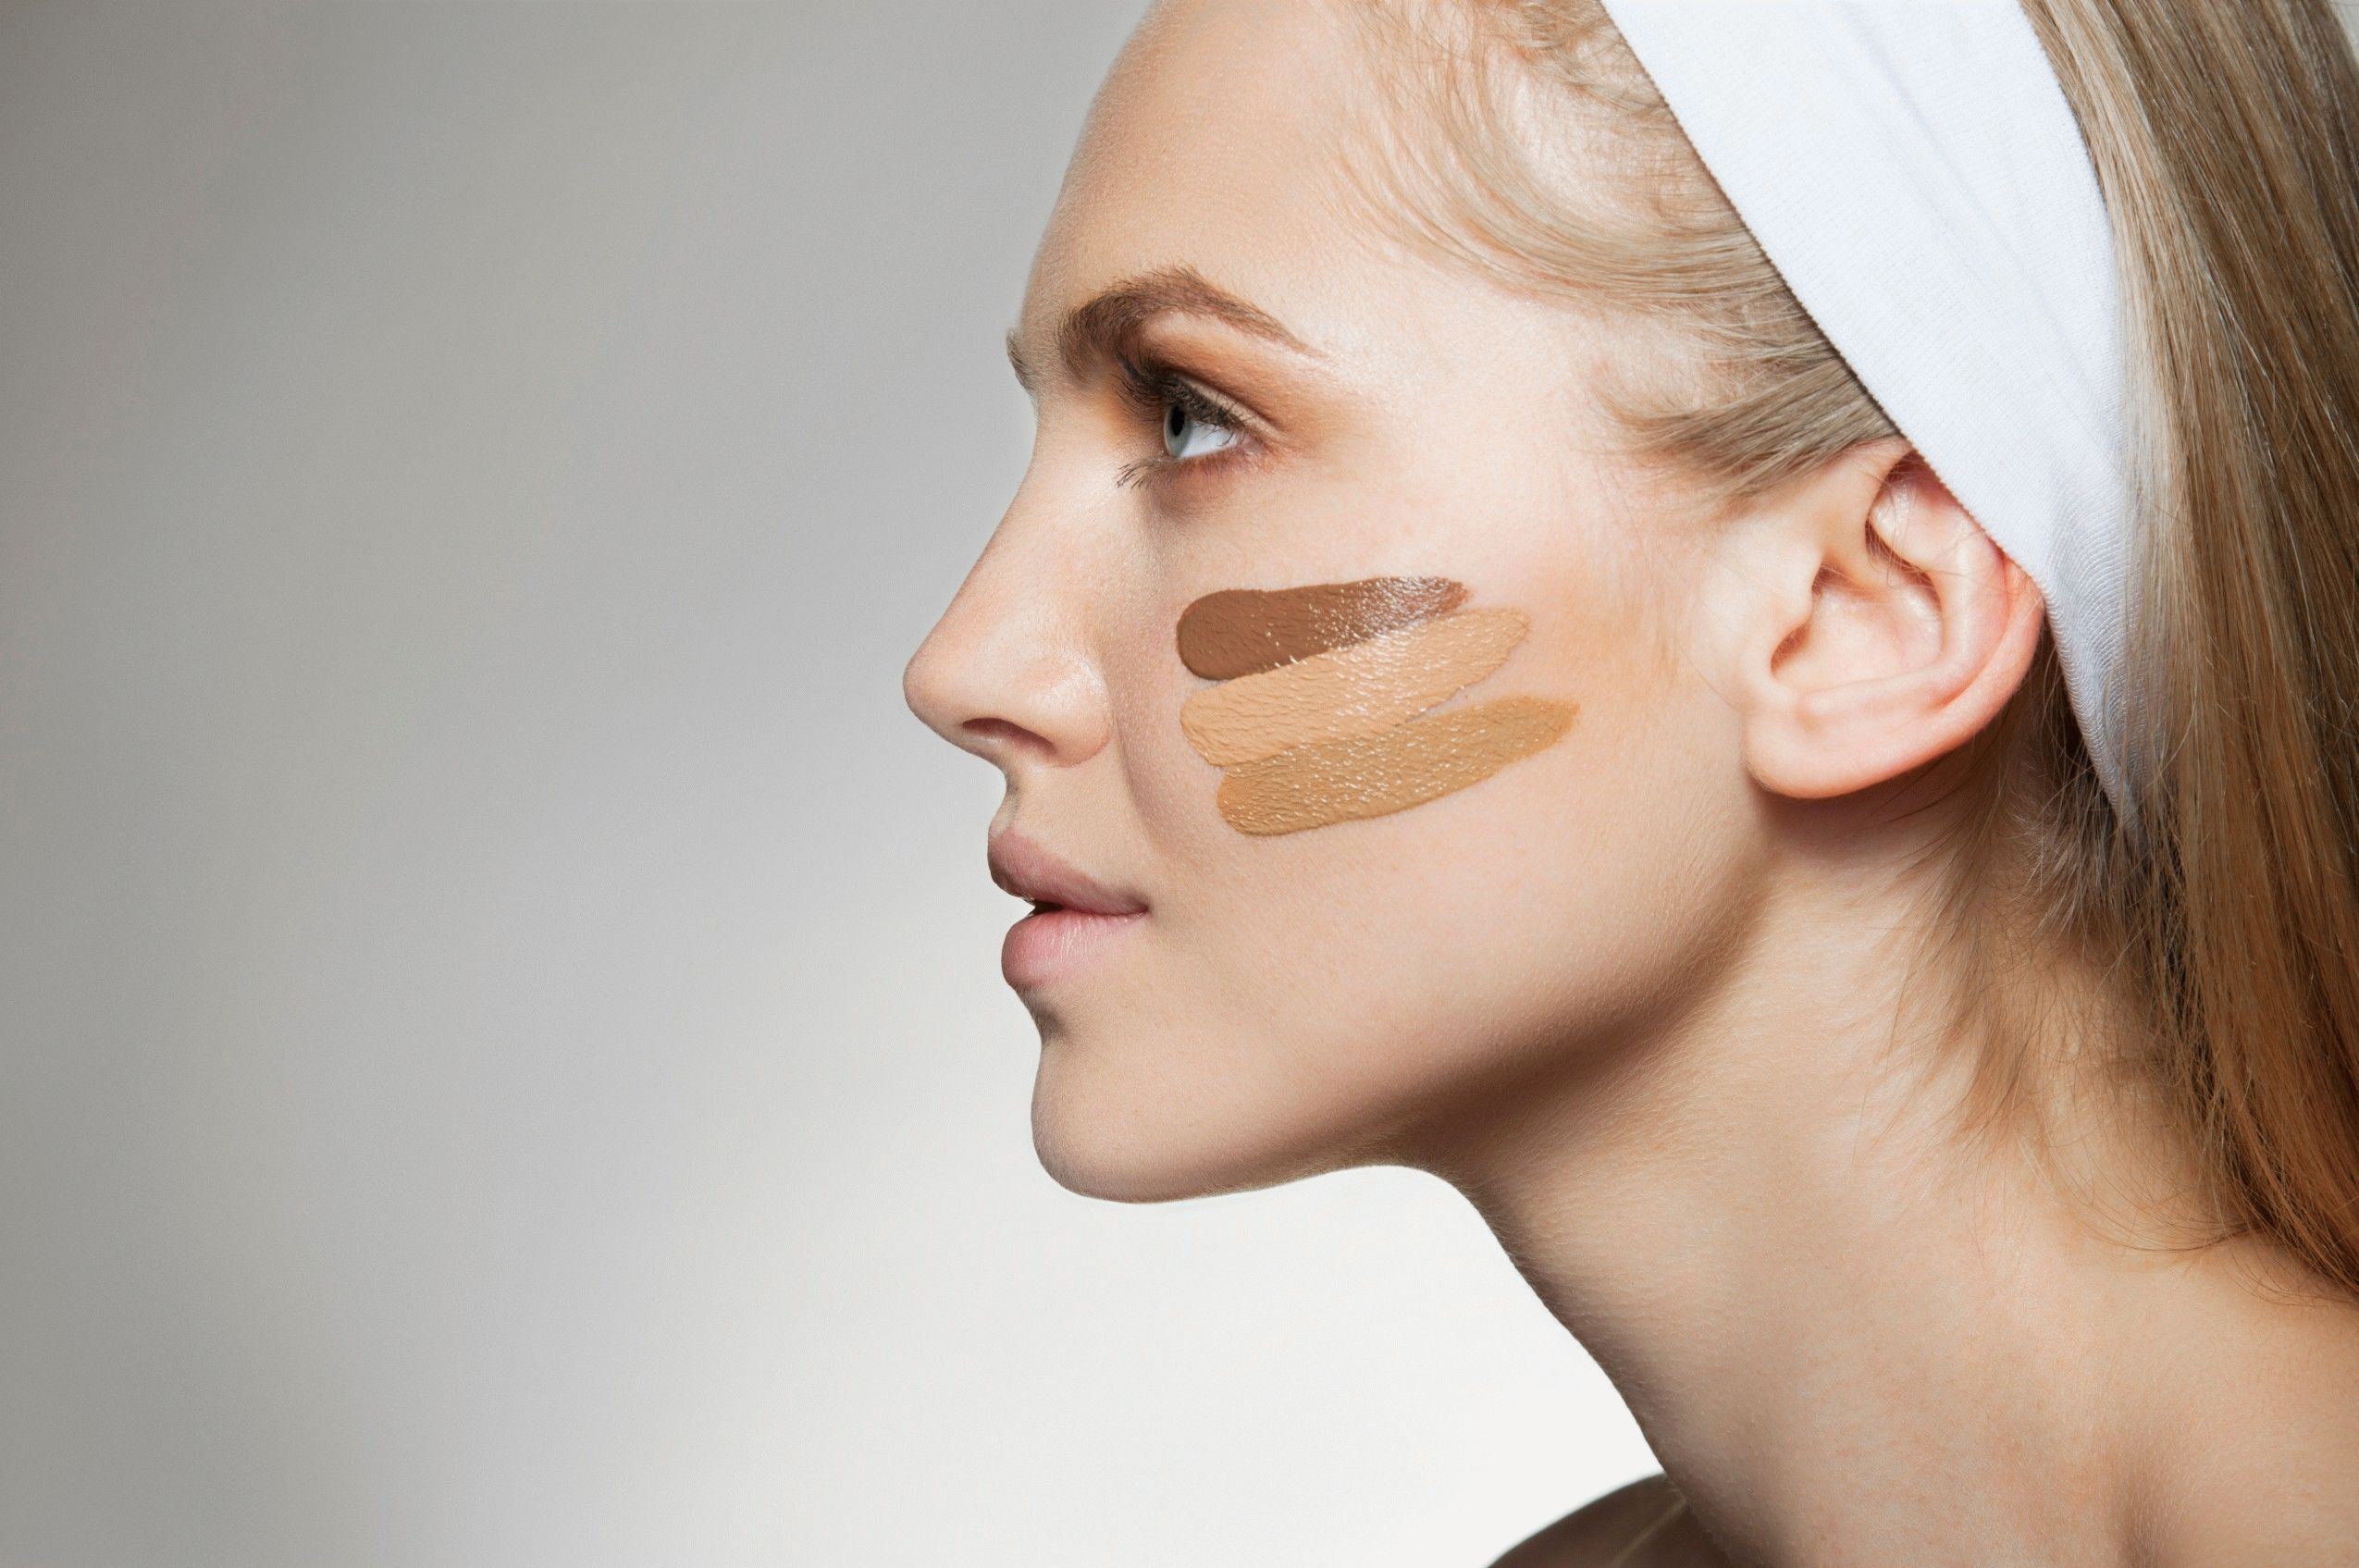 Ranking of the best foundation for face in 2020